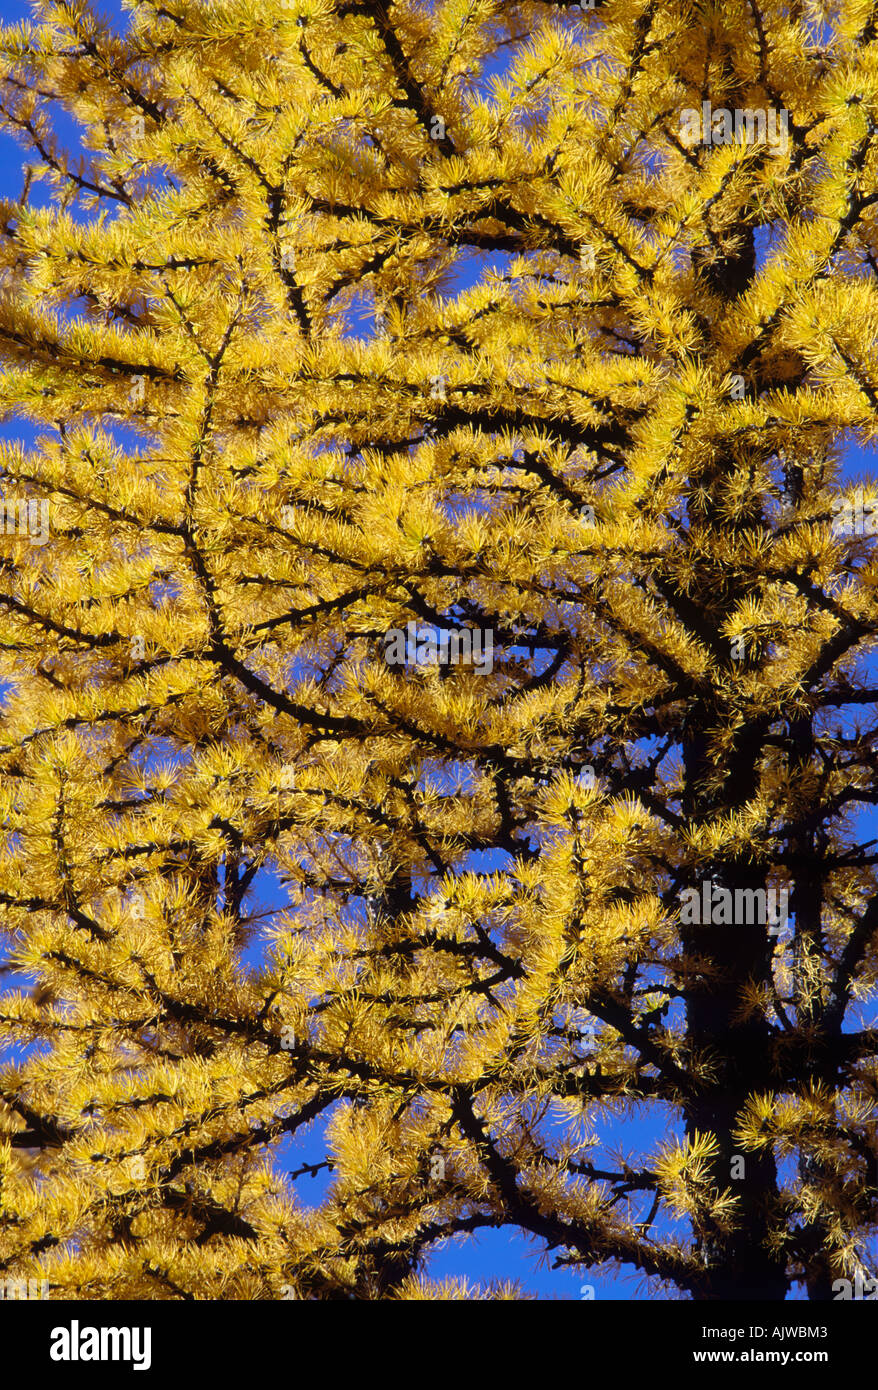 Subalpine larch, Larix lyalli, in autumn.  Larches are conifers that drop their needles in fall. Stock Photo